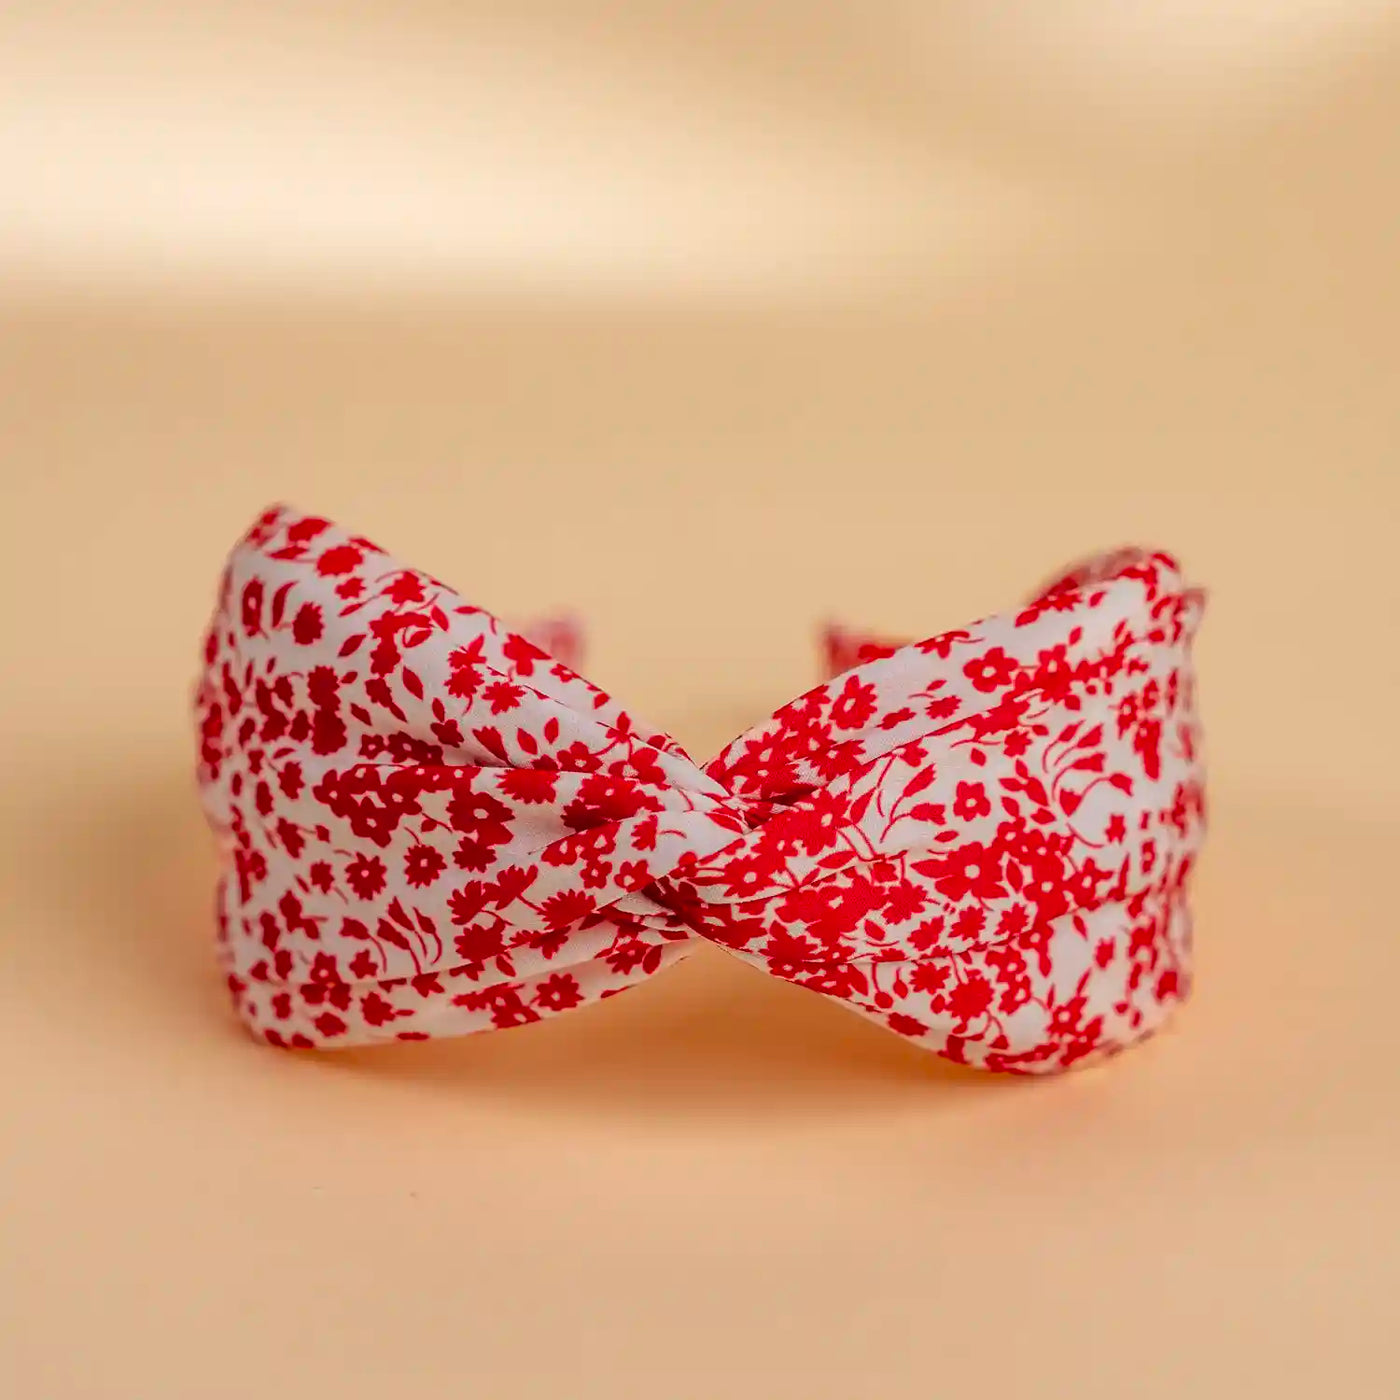 Lucys red and white simple floral headband. White background with simple red floral pattern. Front view.